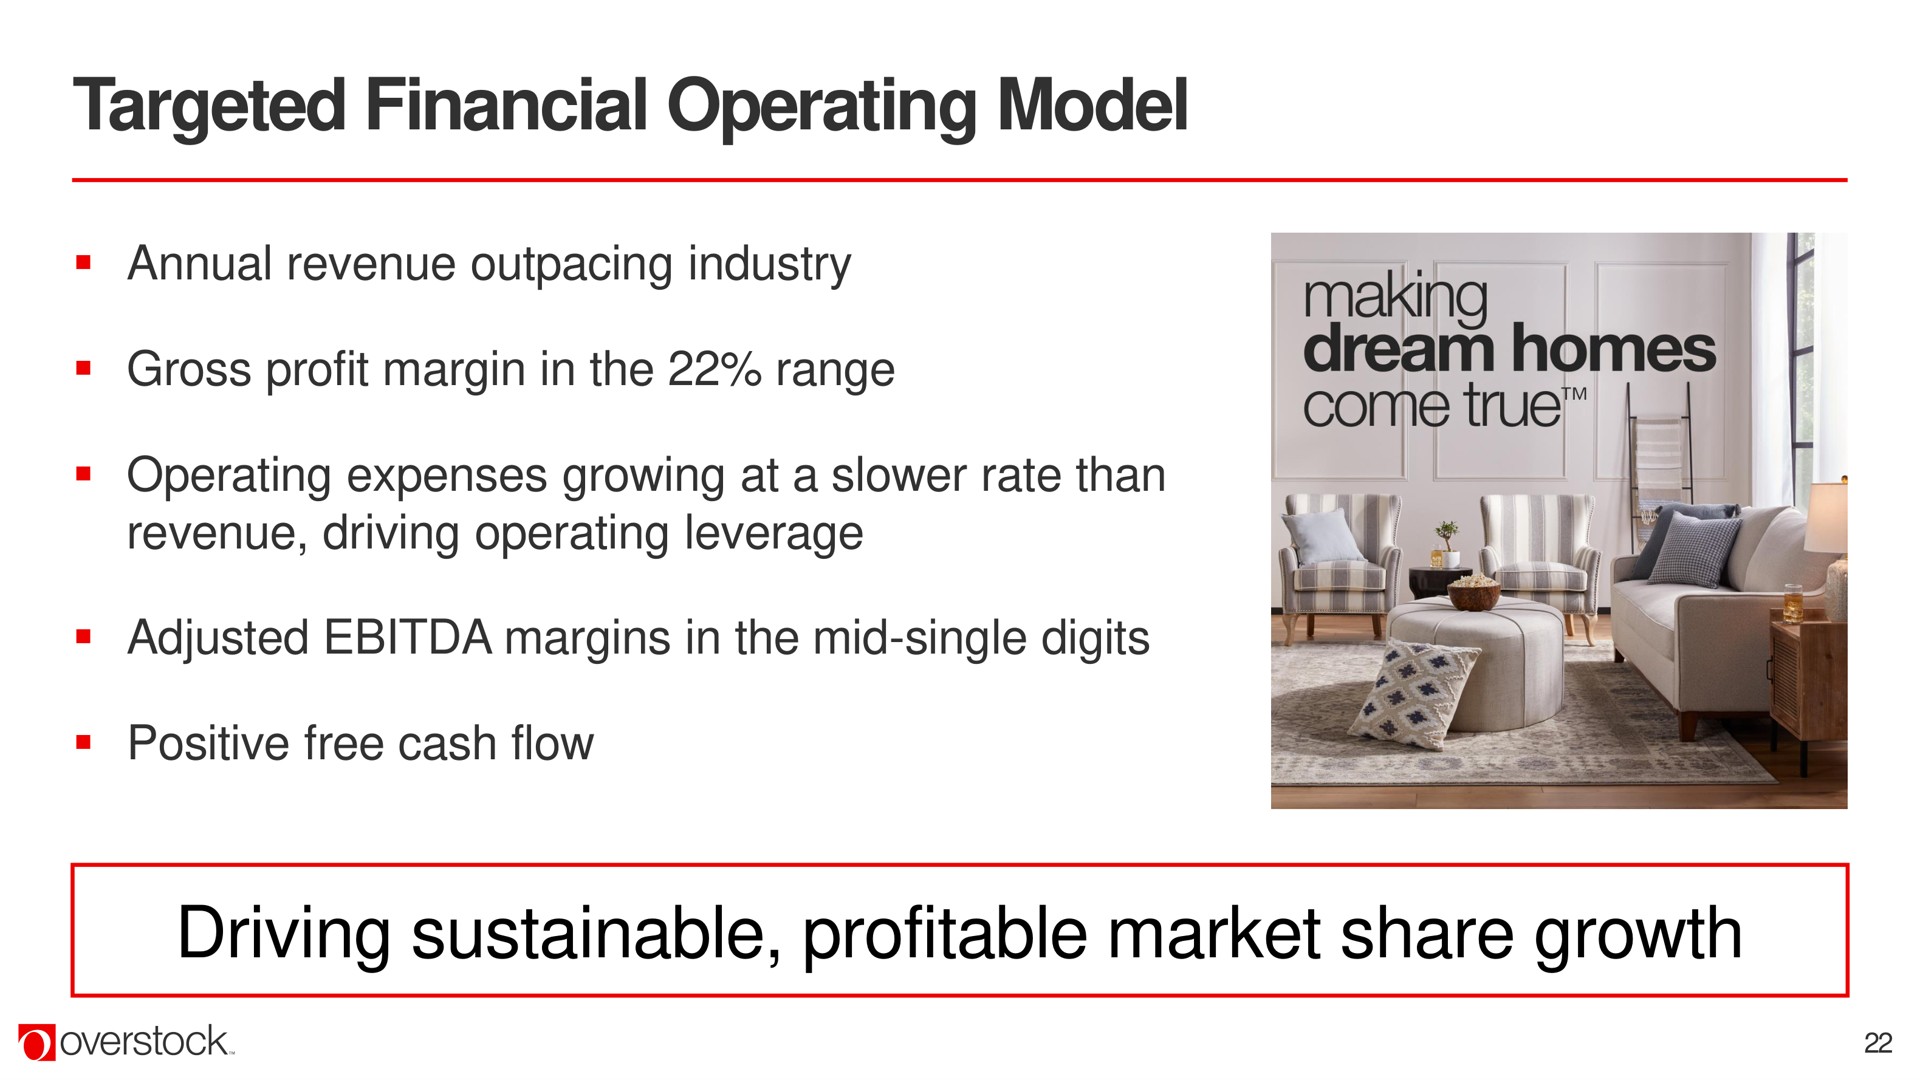 targeted financial operating model driving sustainable profitable market share growth | Overstock